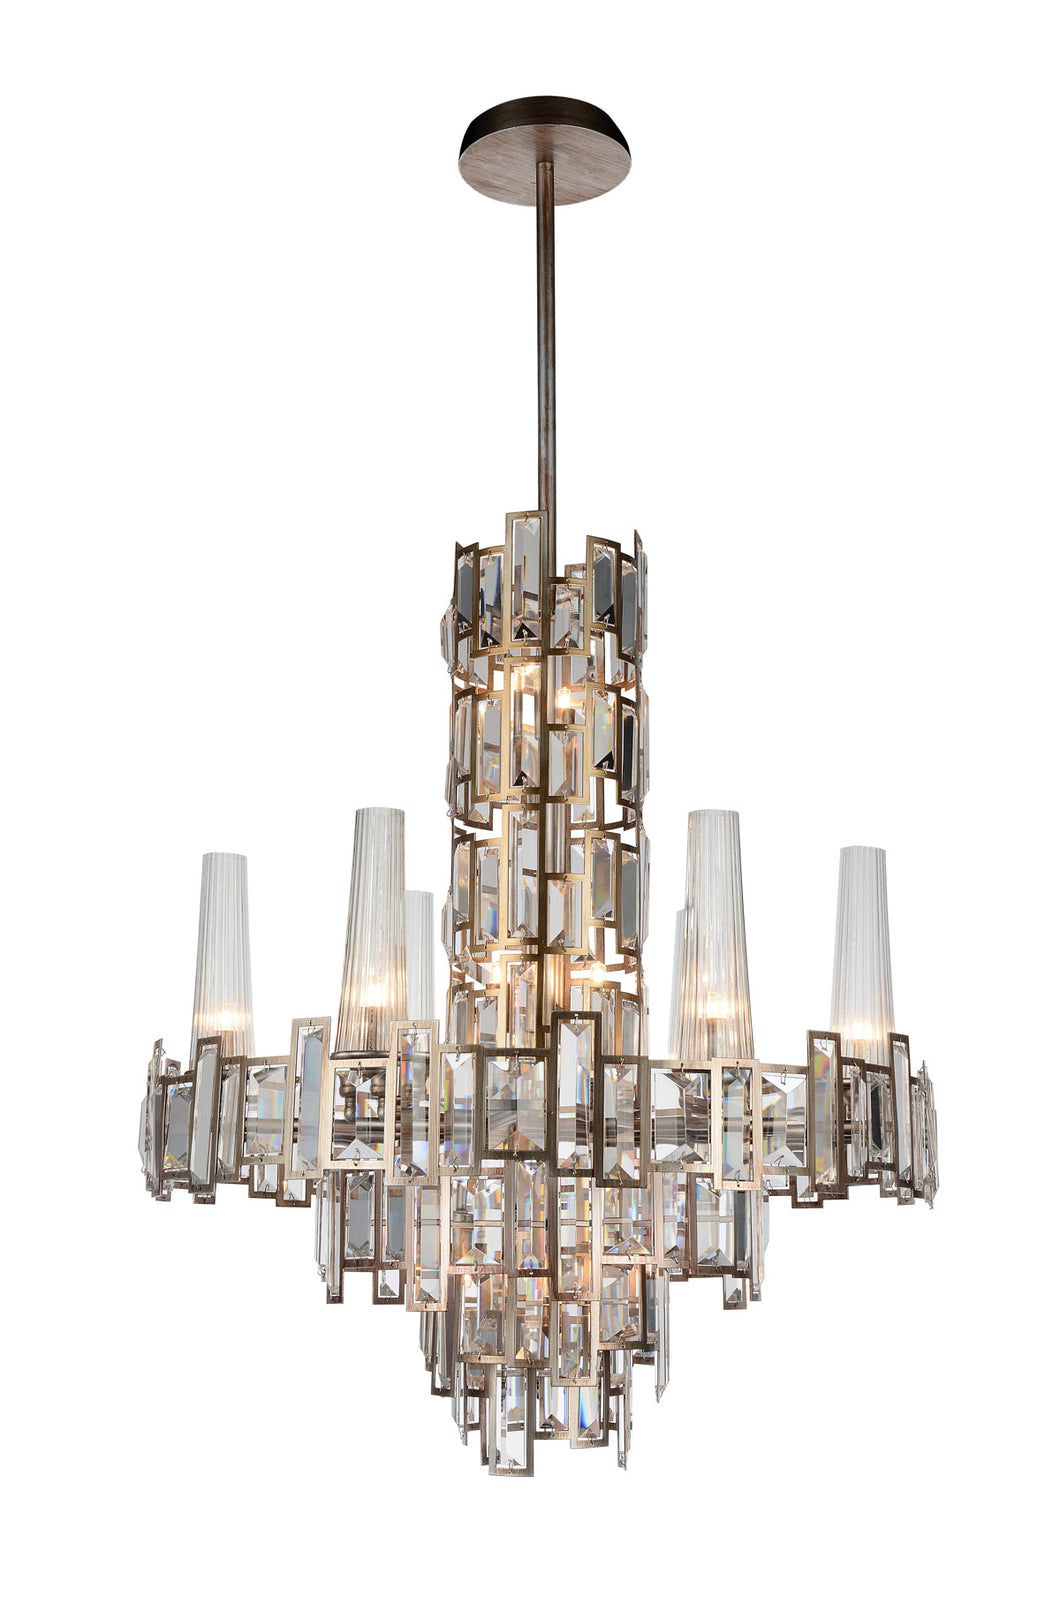 12 Light Down Chandelier with Champagne finish